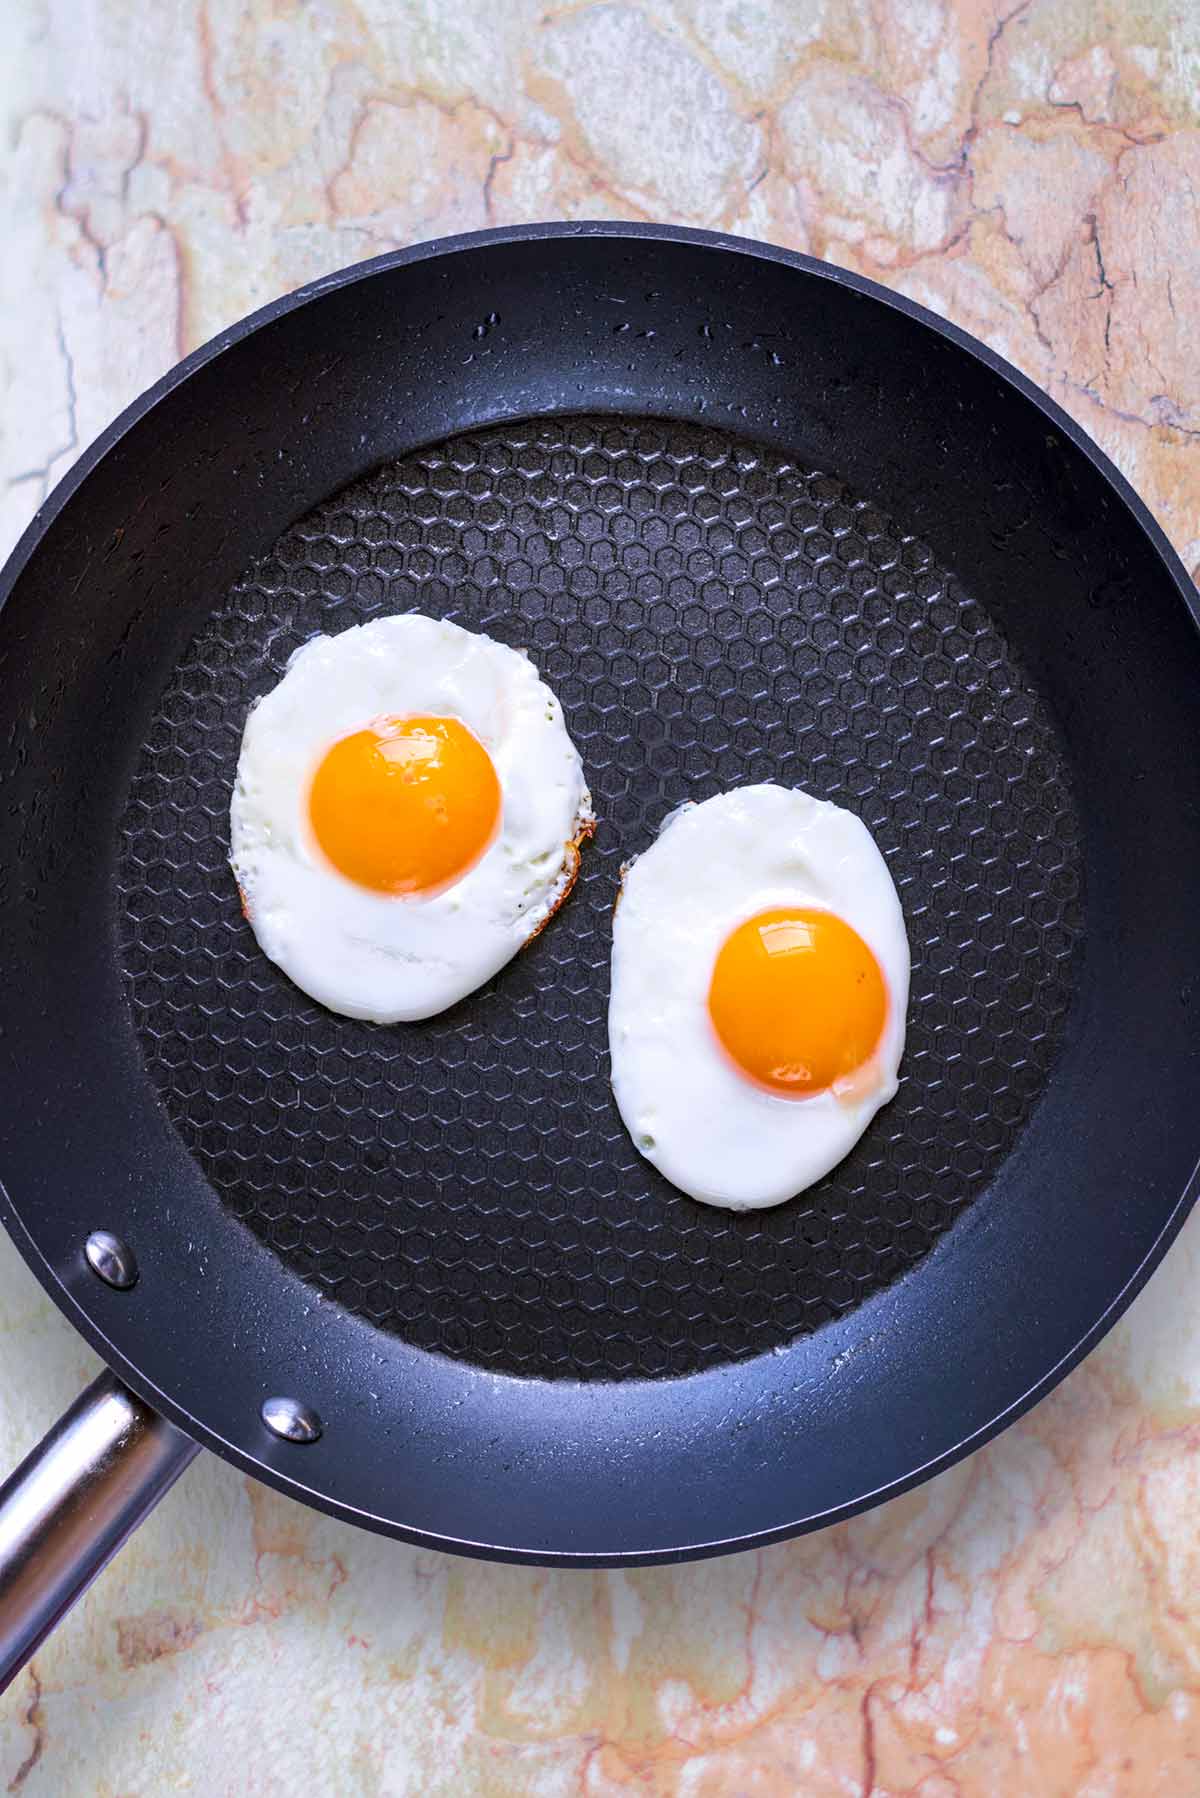 A frying pan with two fried eggs in it.